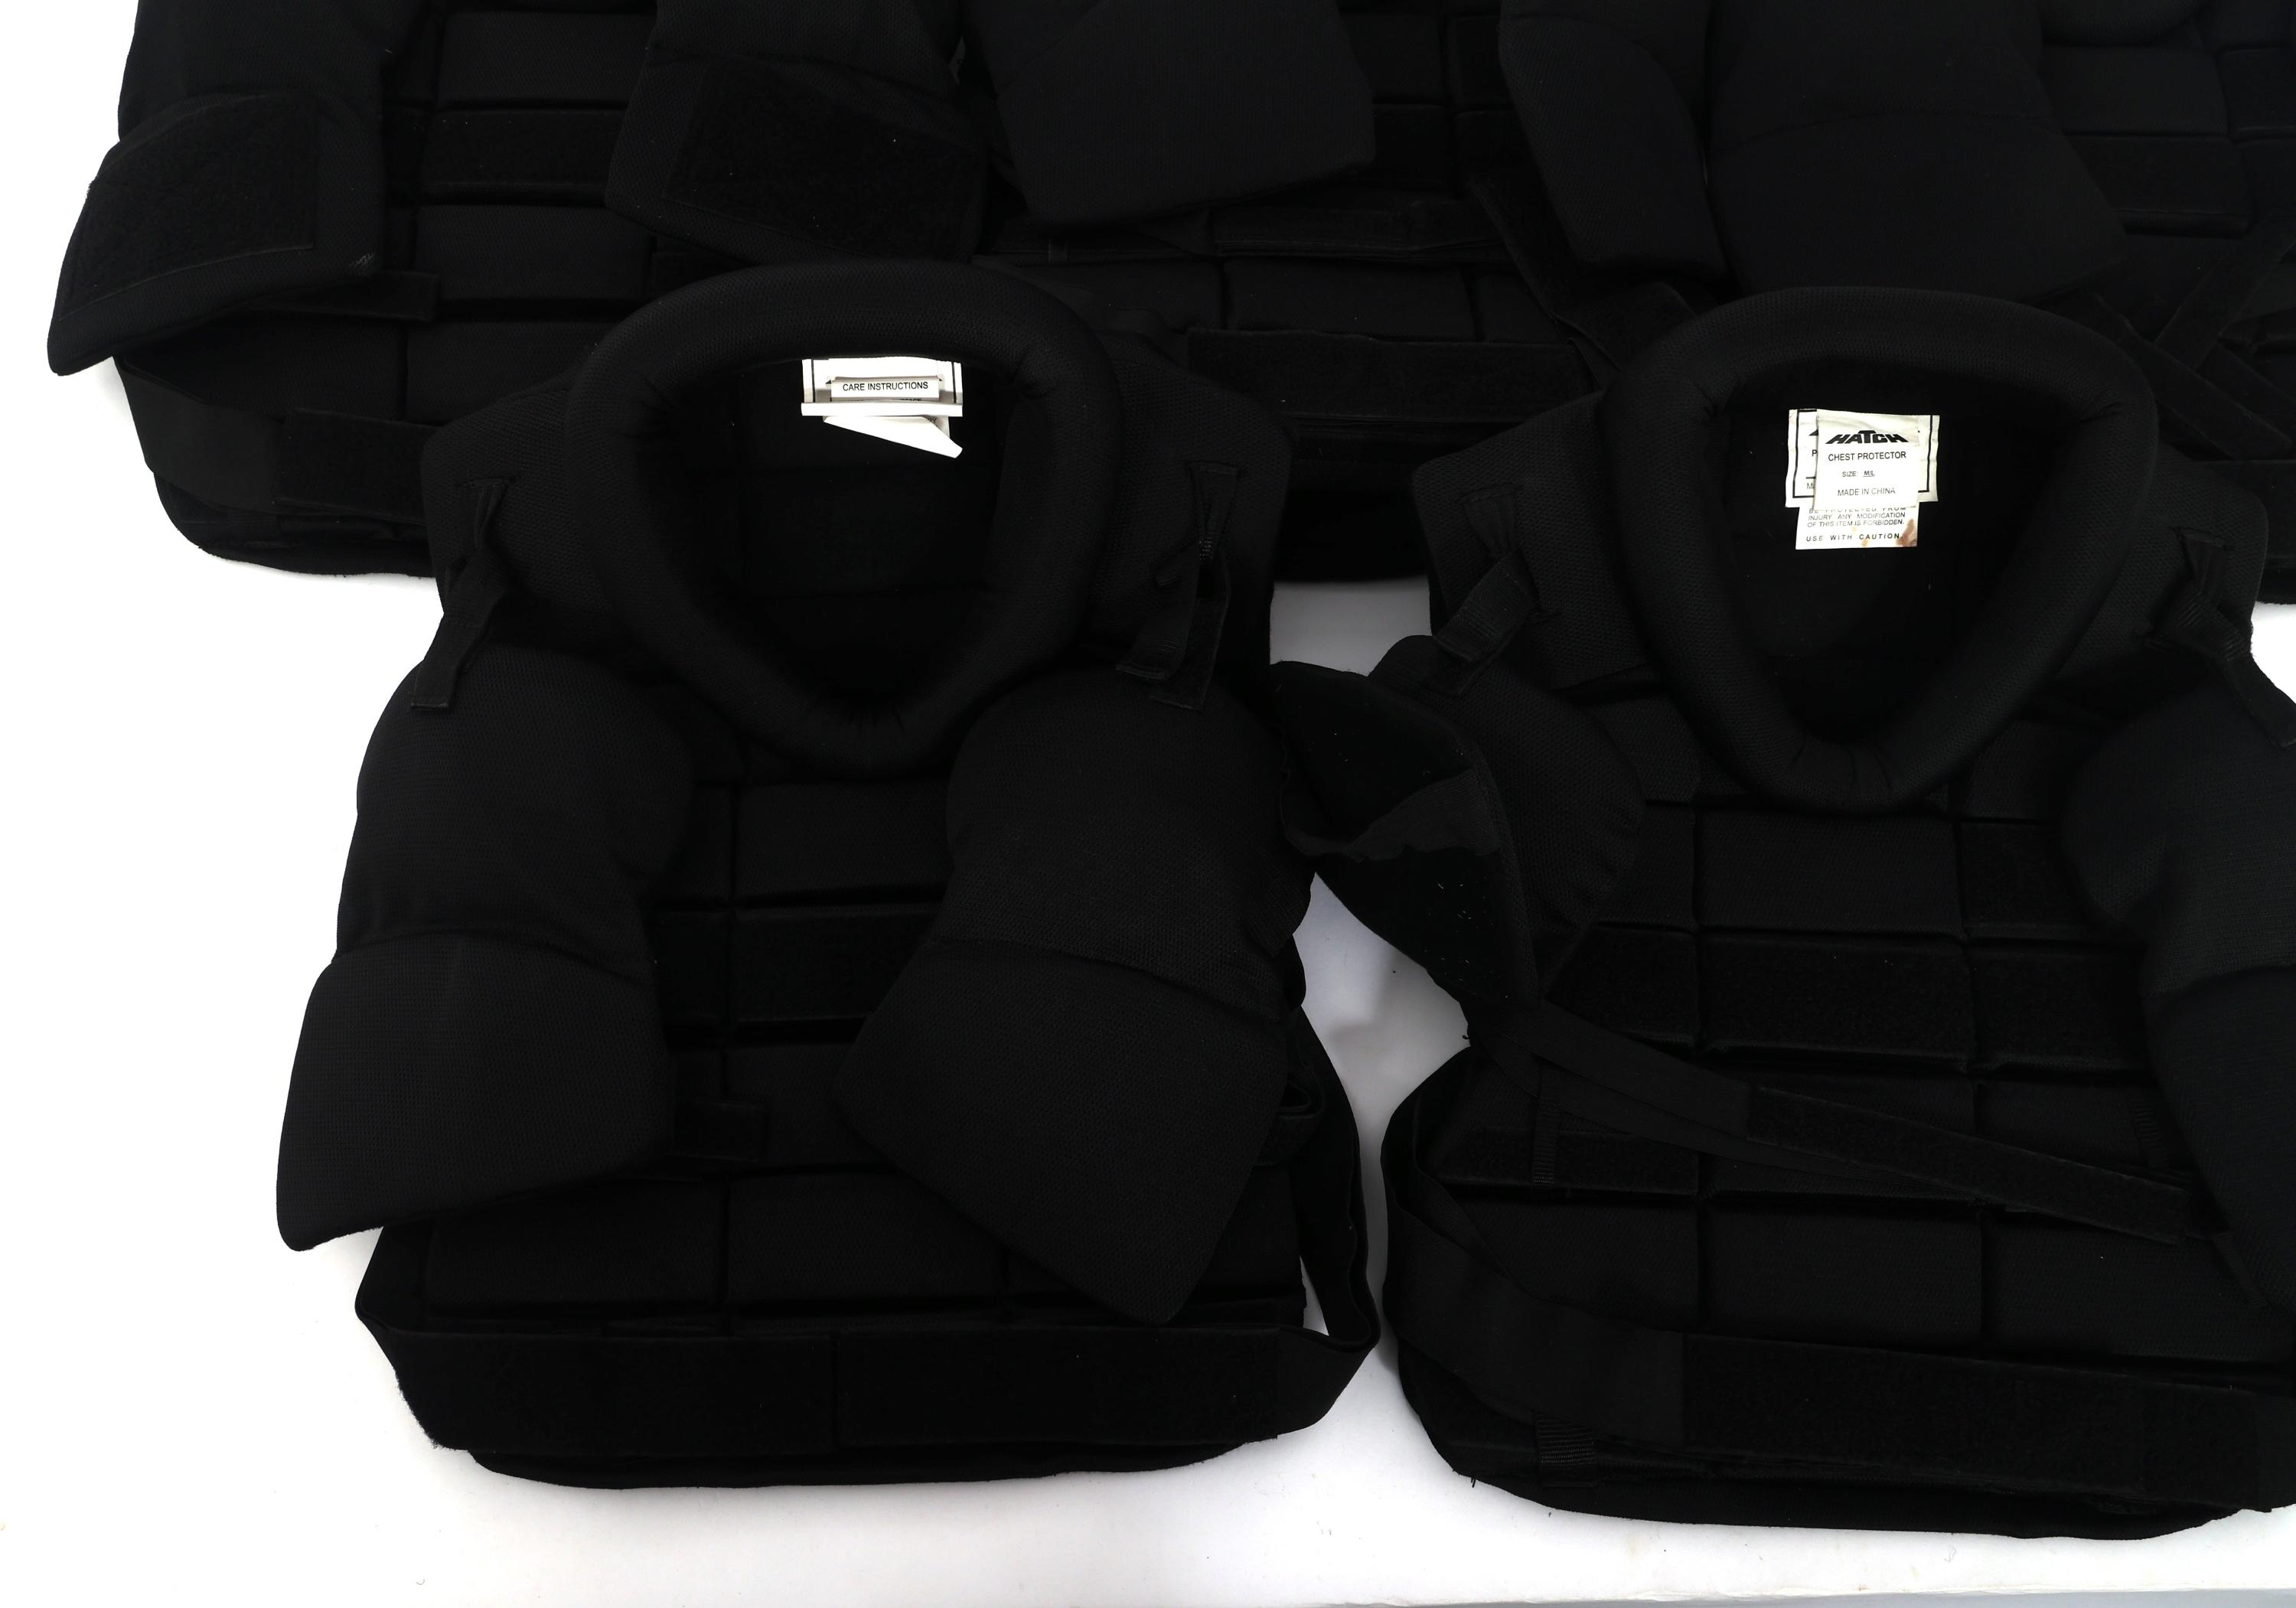 HATCH CPX1000 POLICE RIOT PROTECTION GEAR